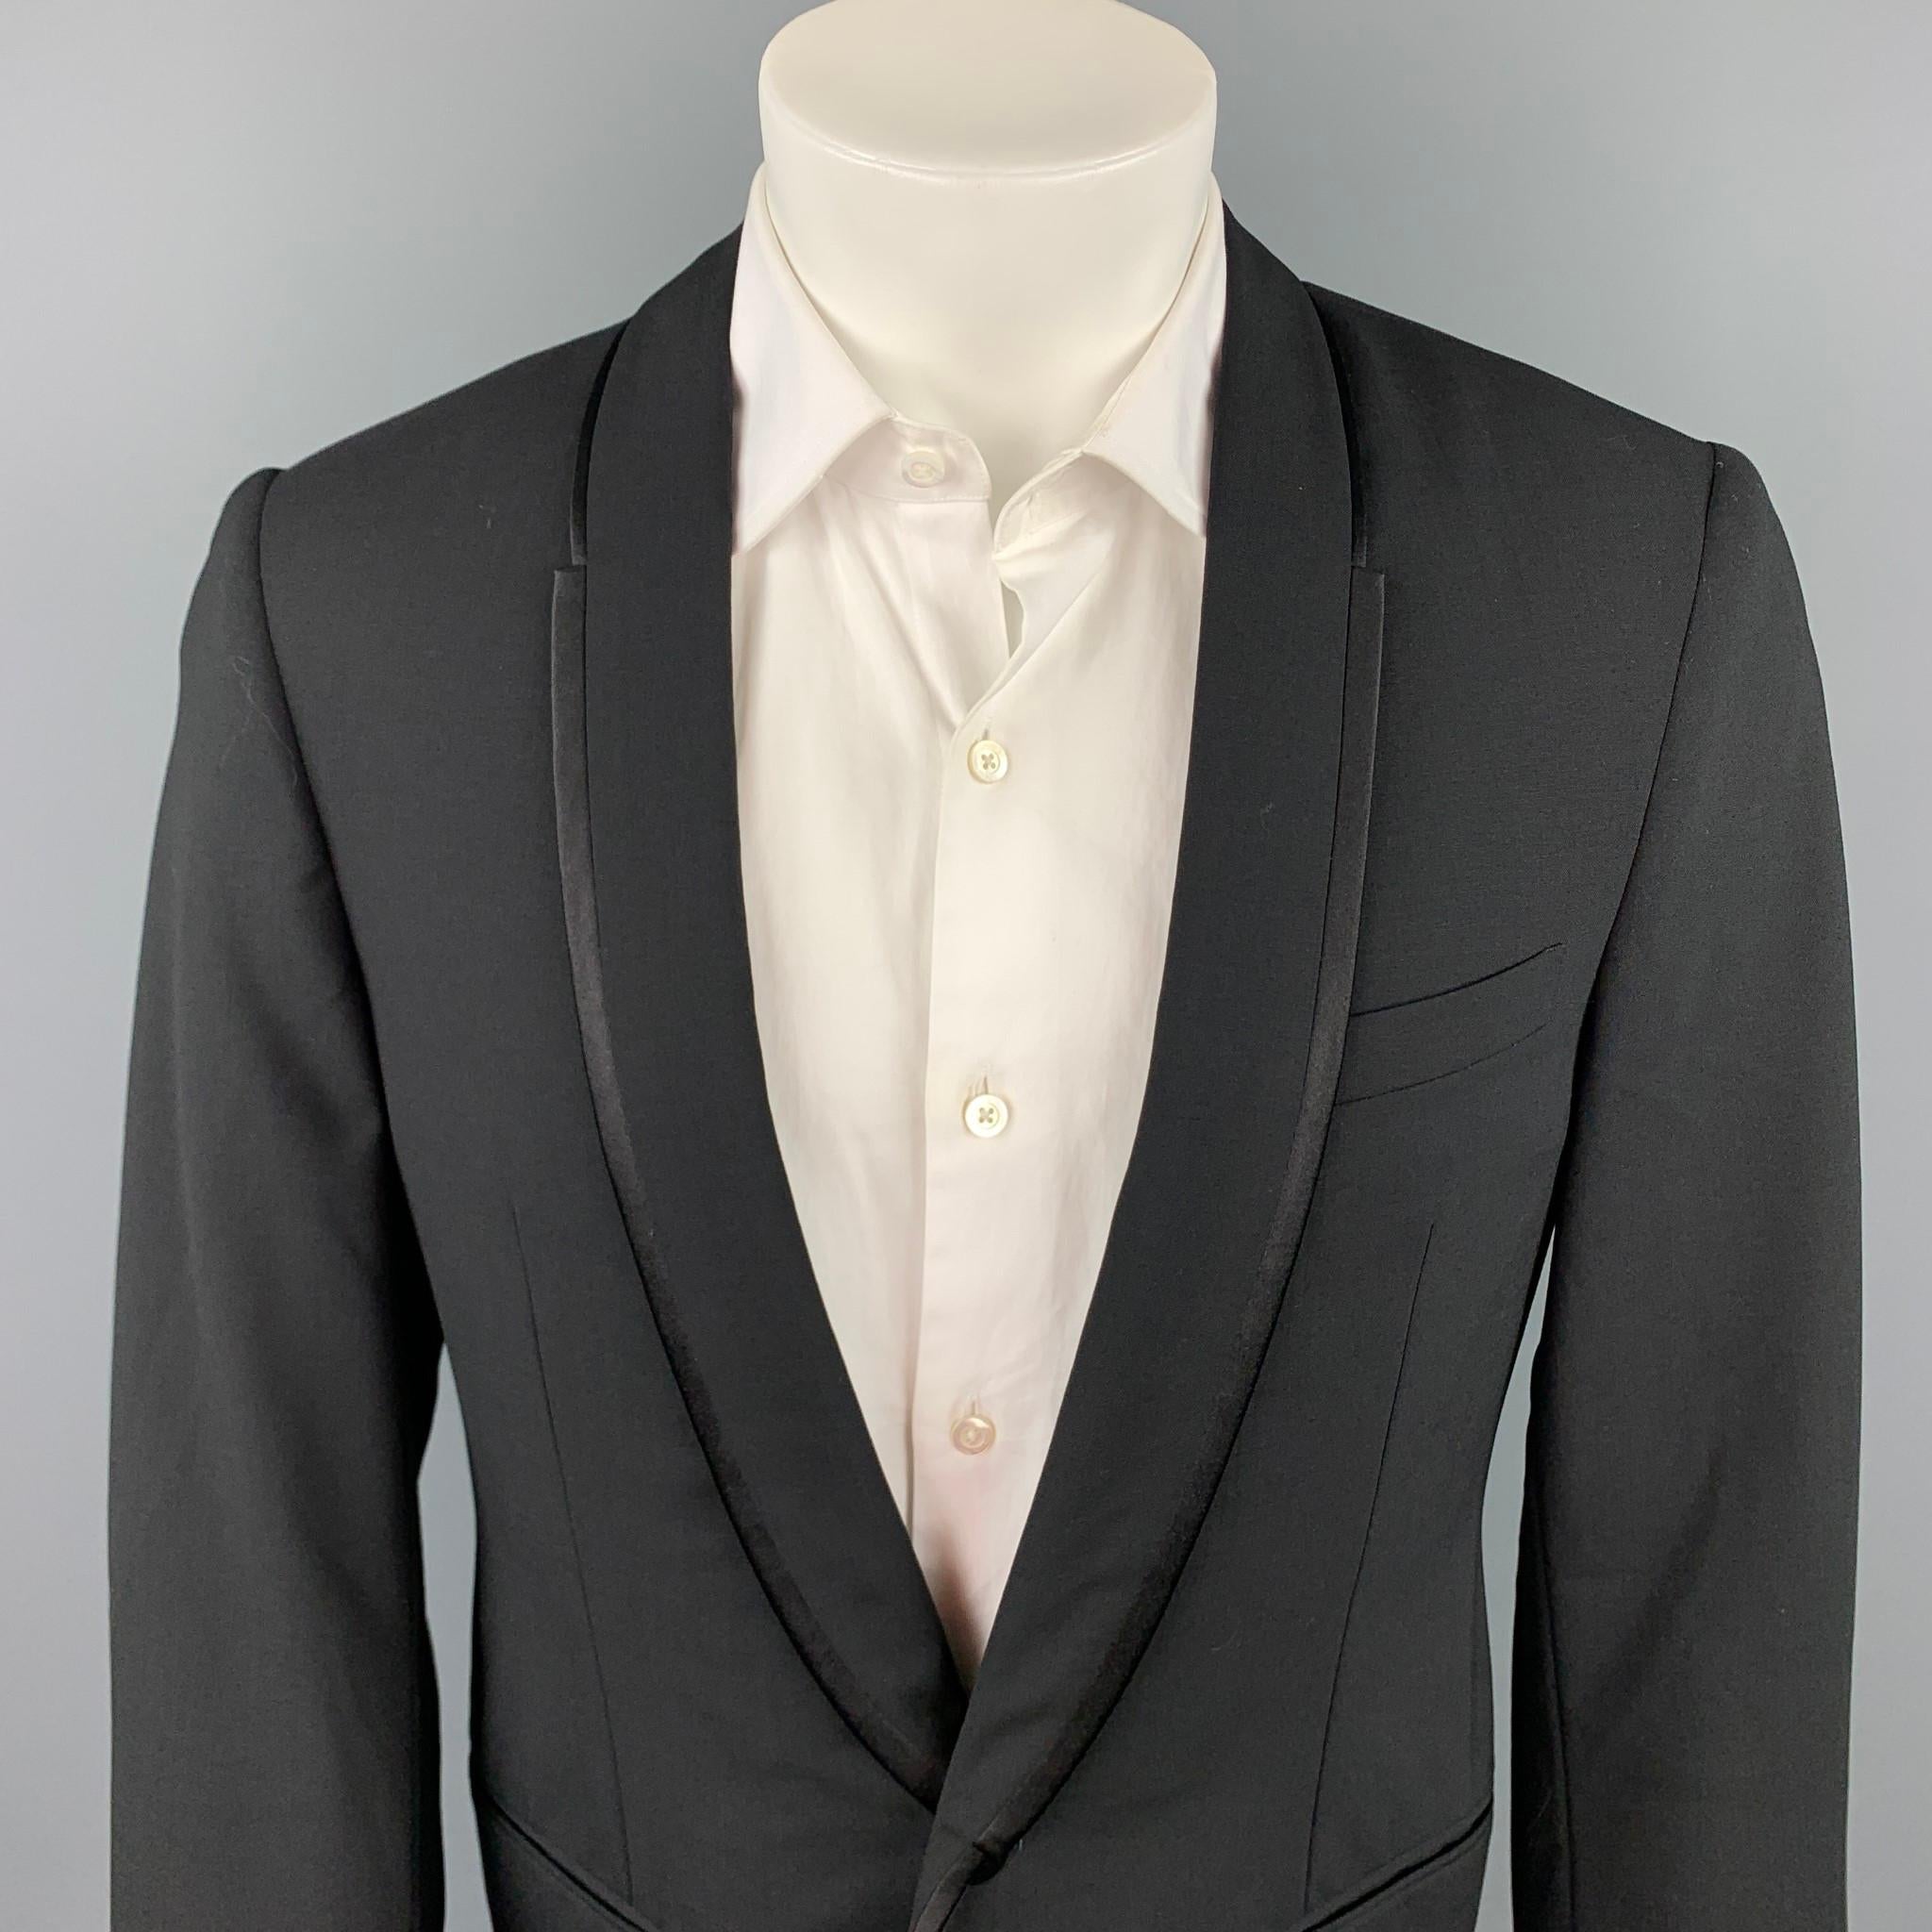 LANVIN sport coat comes in a black wool / lycra with a full liner featuring a shawl lapel, slit pockets, and a single button closure. Made in Italy.

Very Good Pre-Owned Condition.
Marked: 50

Measurements:

Shoulder: 18 in.
Chest: 40 in.
Sleeve: 27